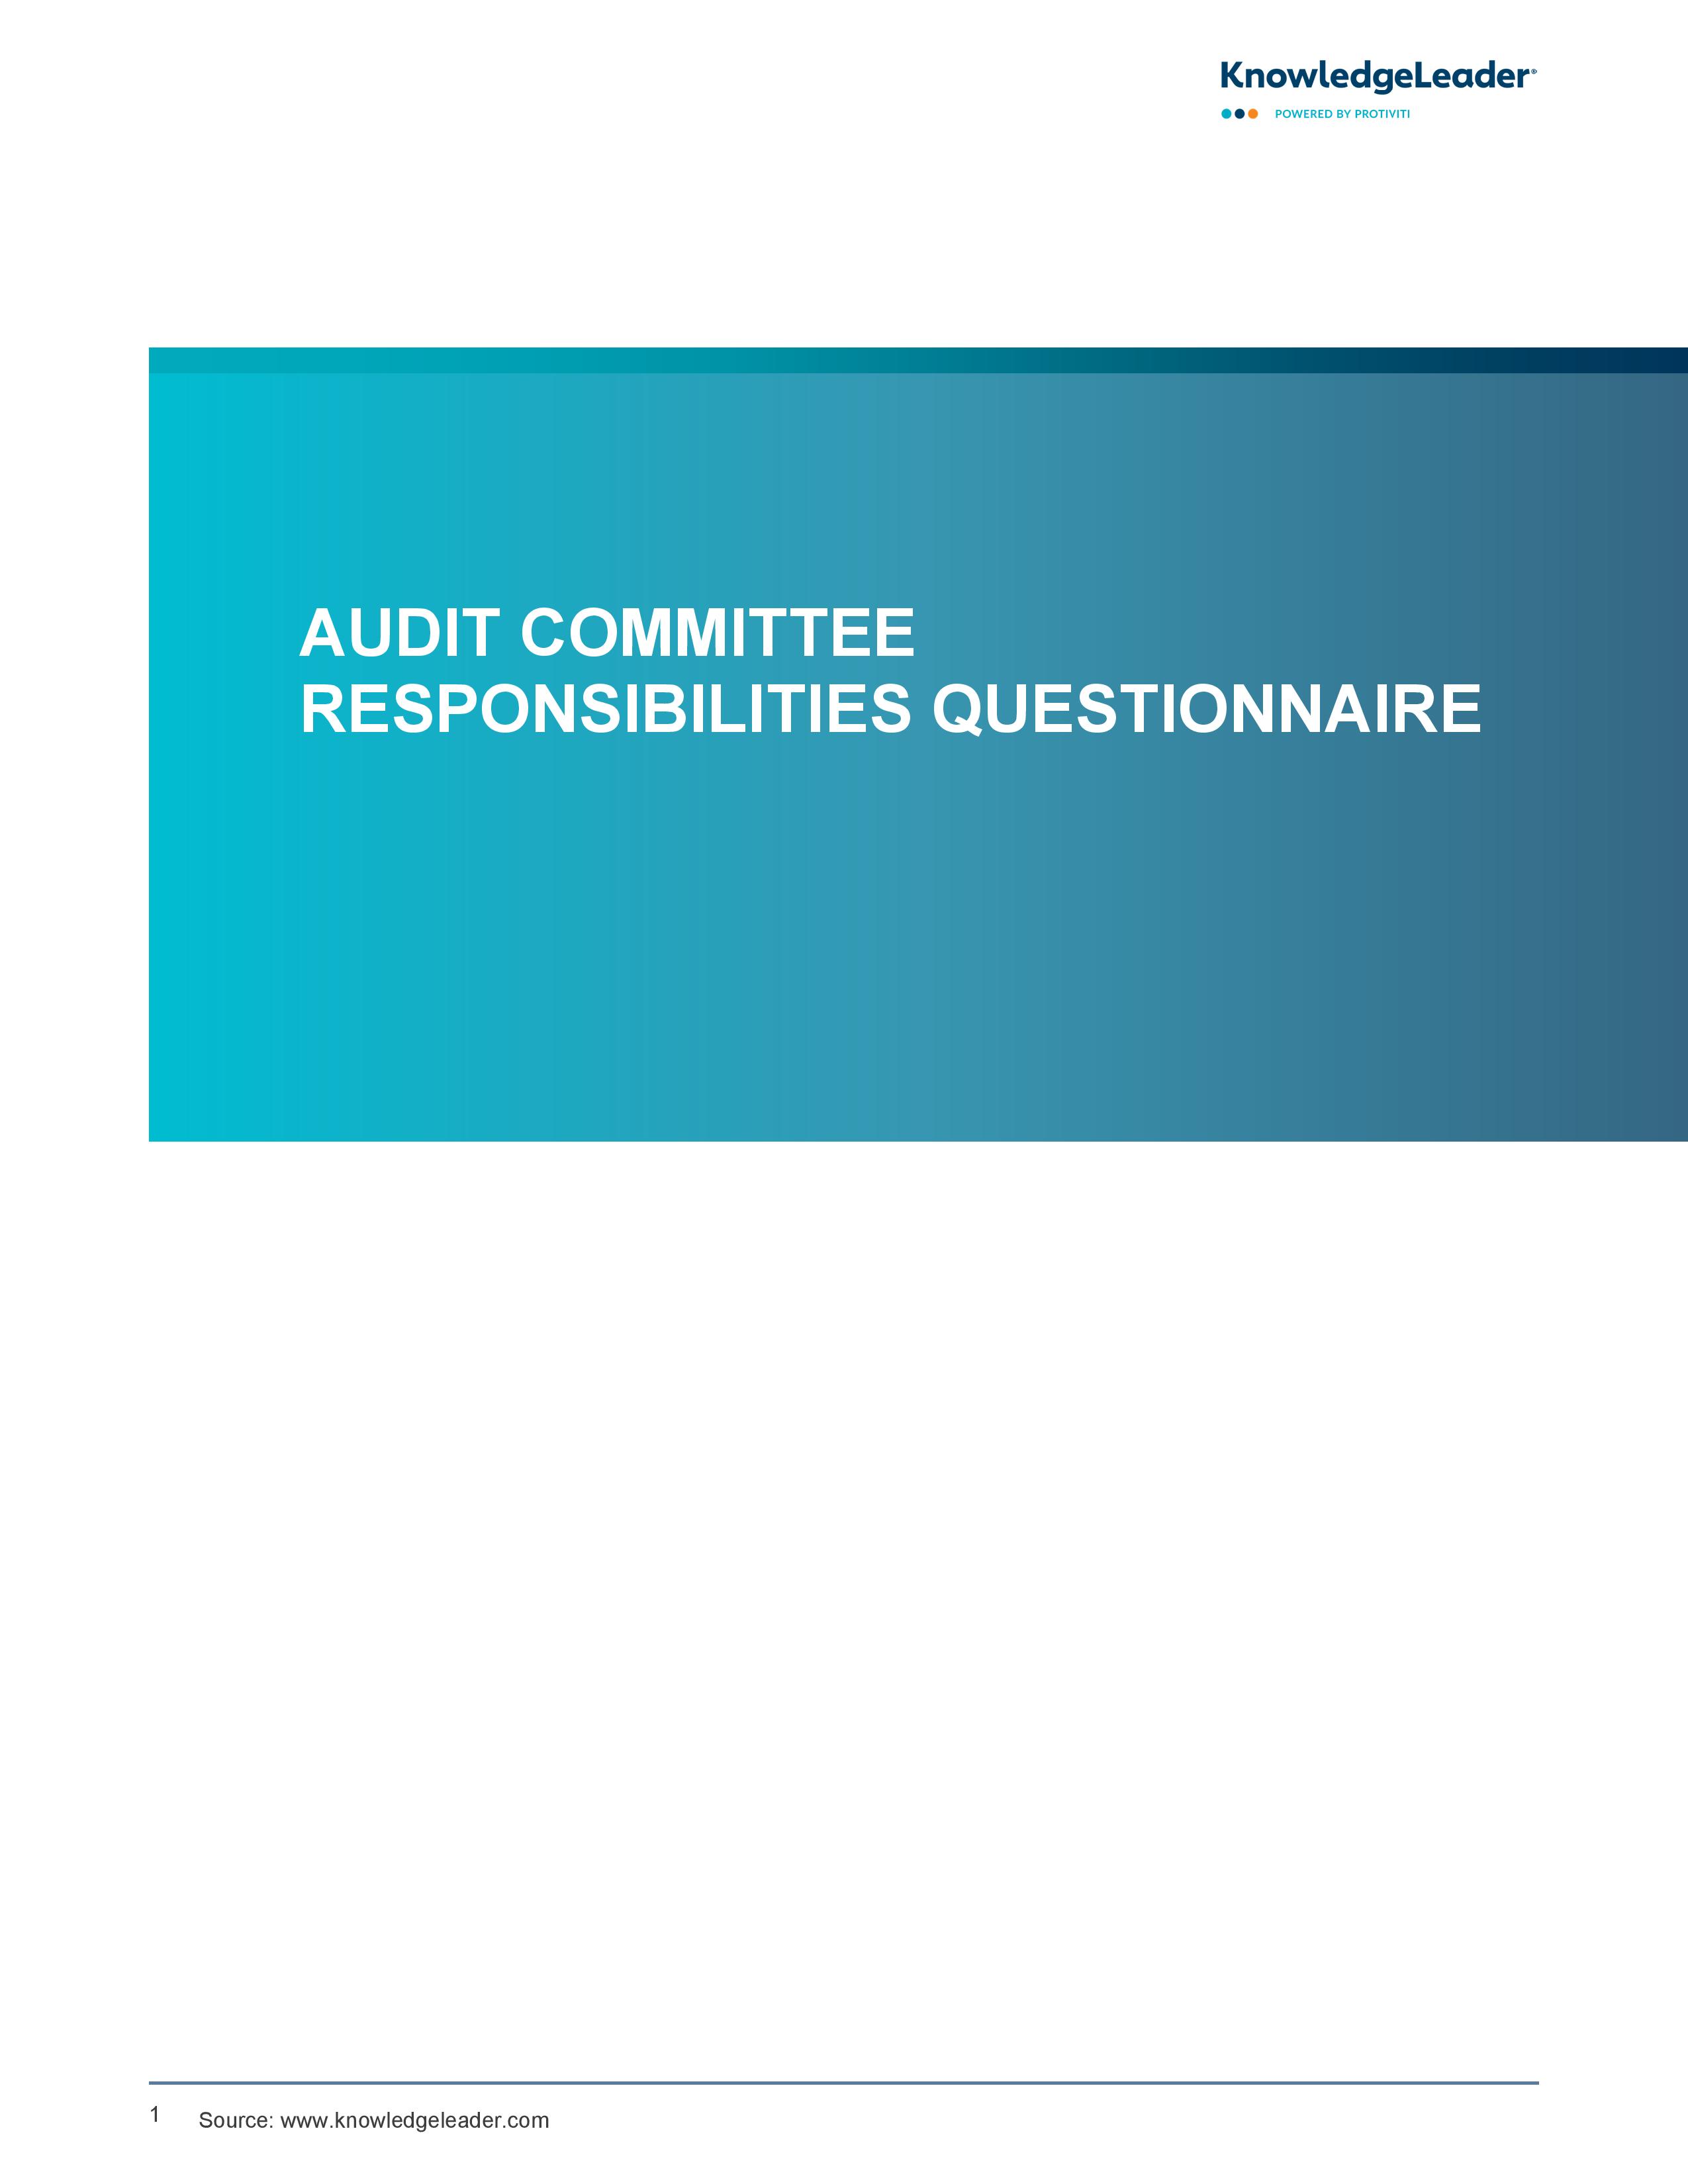 Screenshot of the First Page of Audit Committee Responsibilities Questionnaire